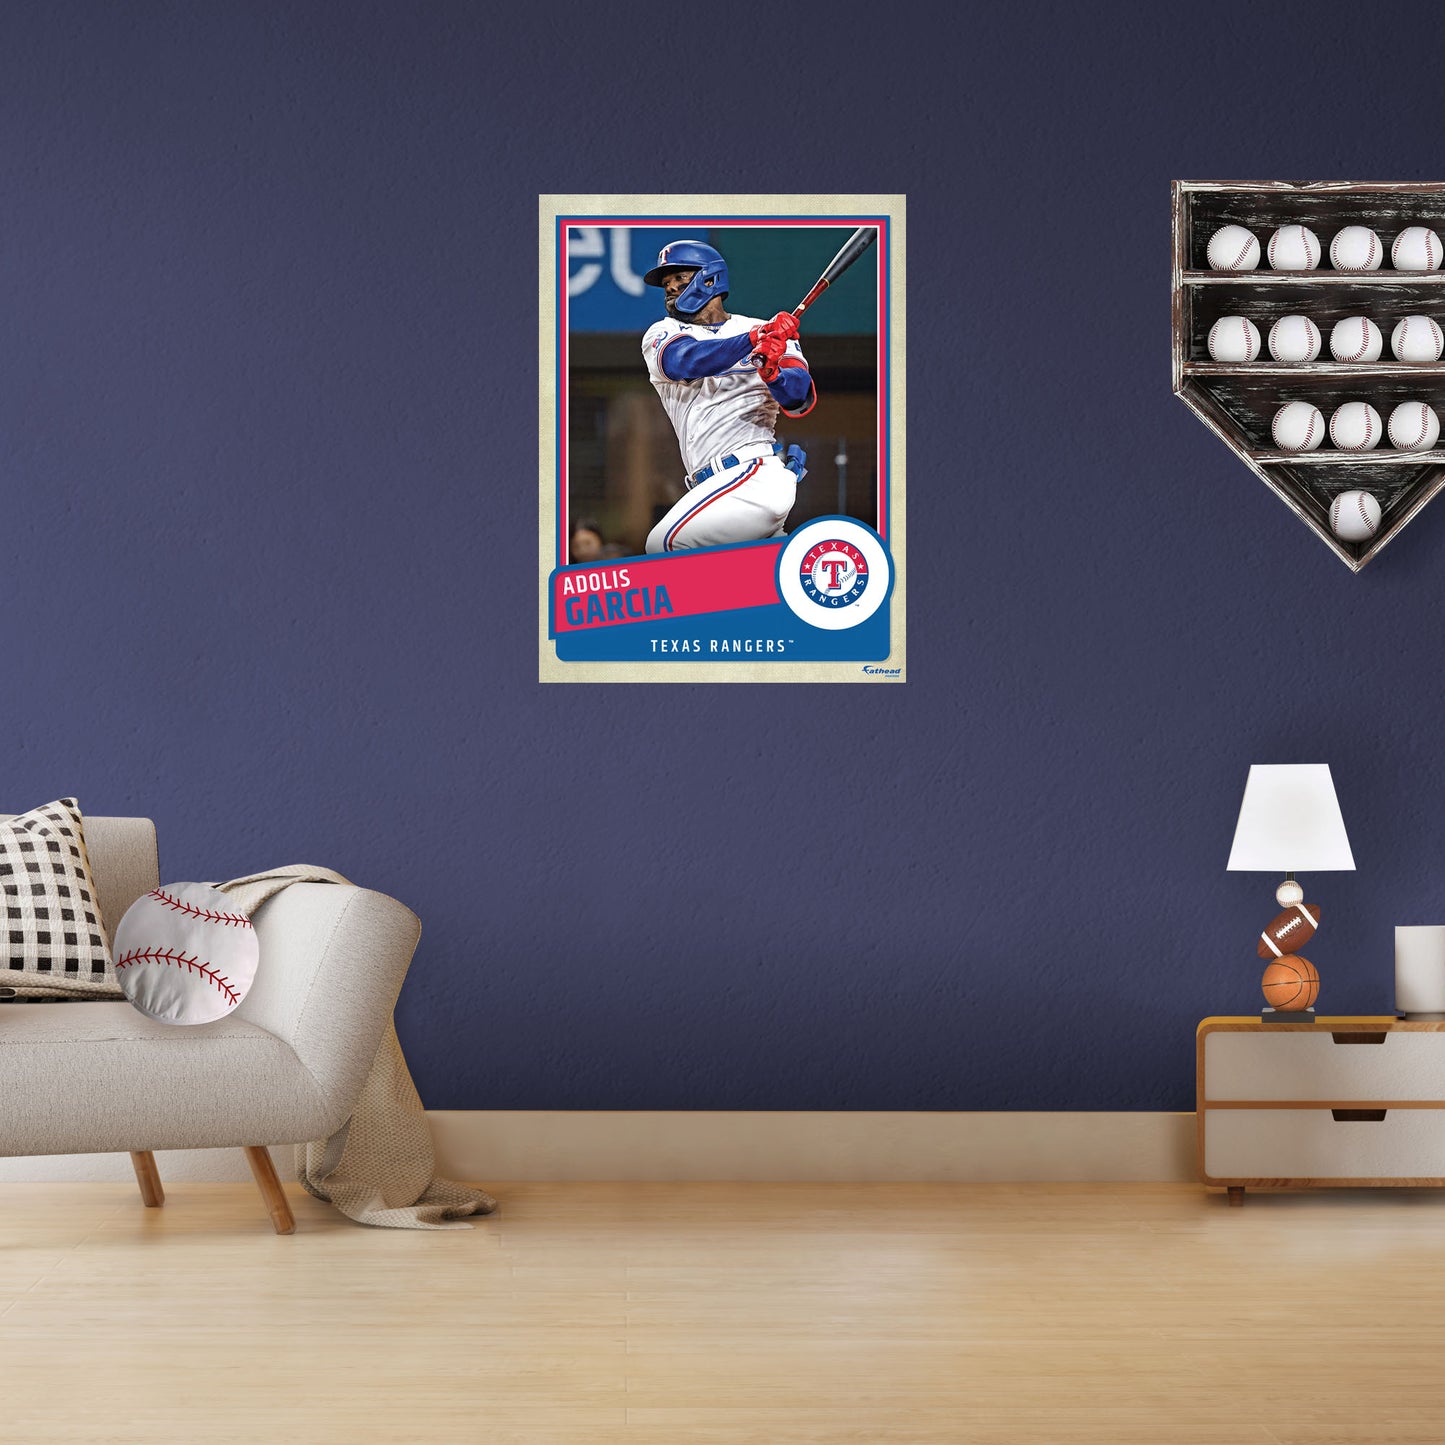 Texas Rangers: Adolís Garcia  Poster        - Officially Licensed MLB Removable     Adhesive Decal